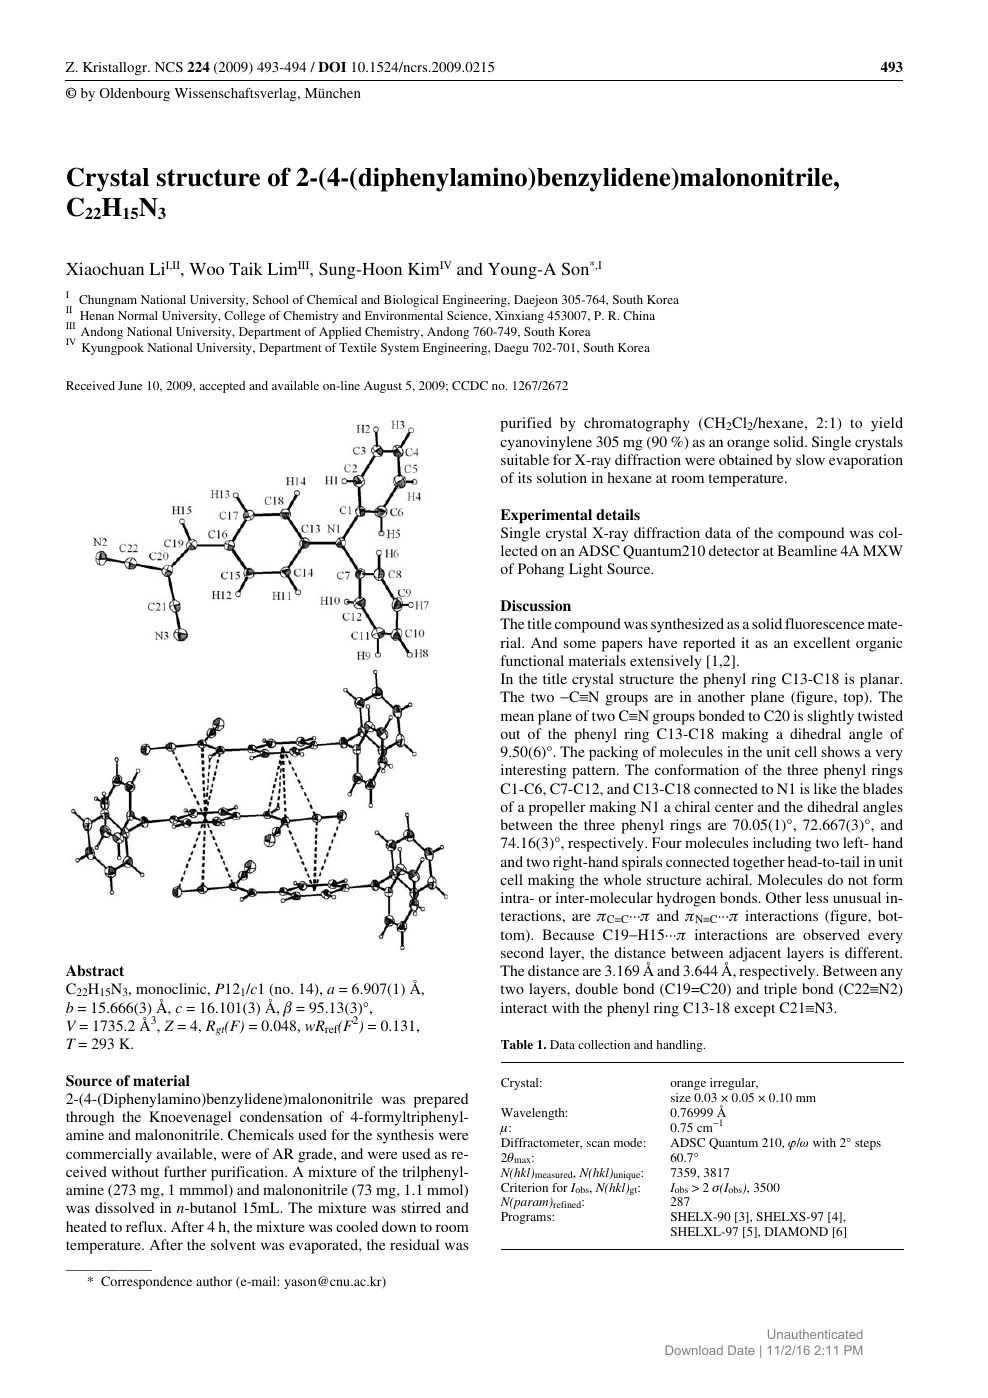 Crystal Structure Of 2 4 Diphenylamino Benzylidene Malononitrile C22h15n3 Topic Of Research Paper In Chemical Sciences Download Scholarly Article Pdf And Read For Free On Cyberleninka Open Science Hub